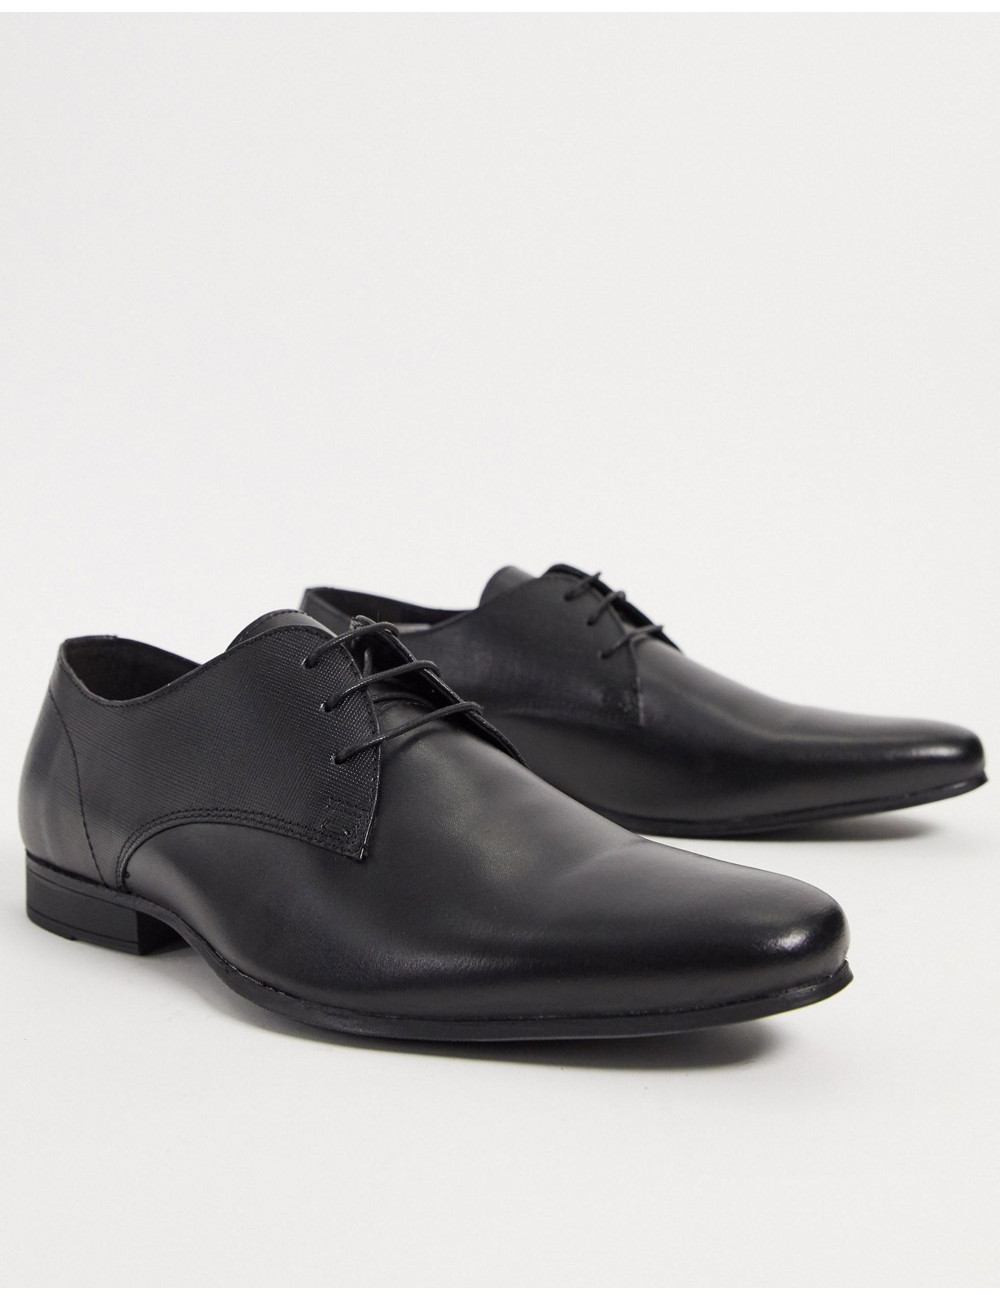 Topman leather derby shoes...